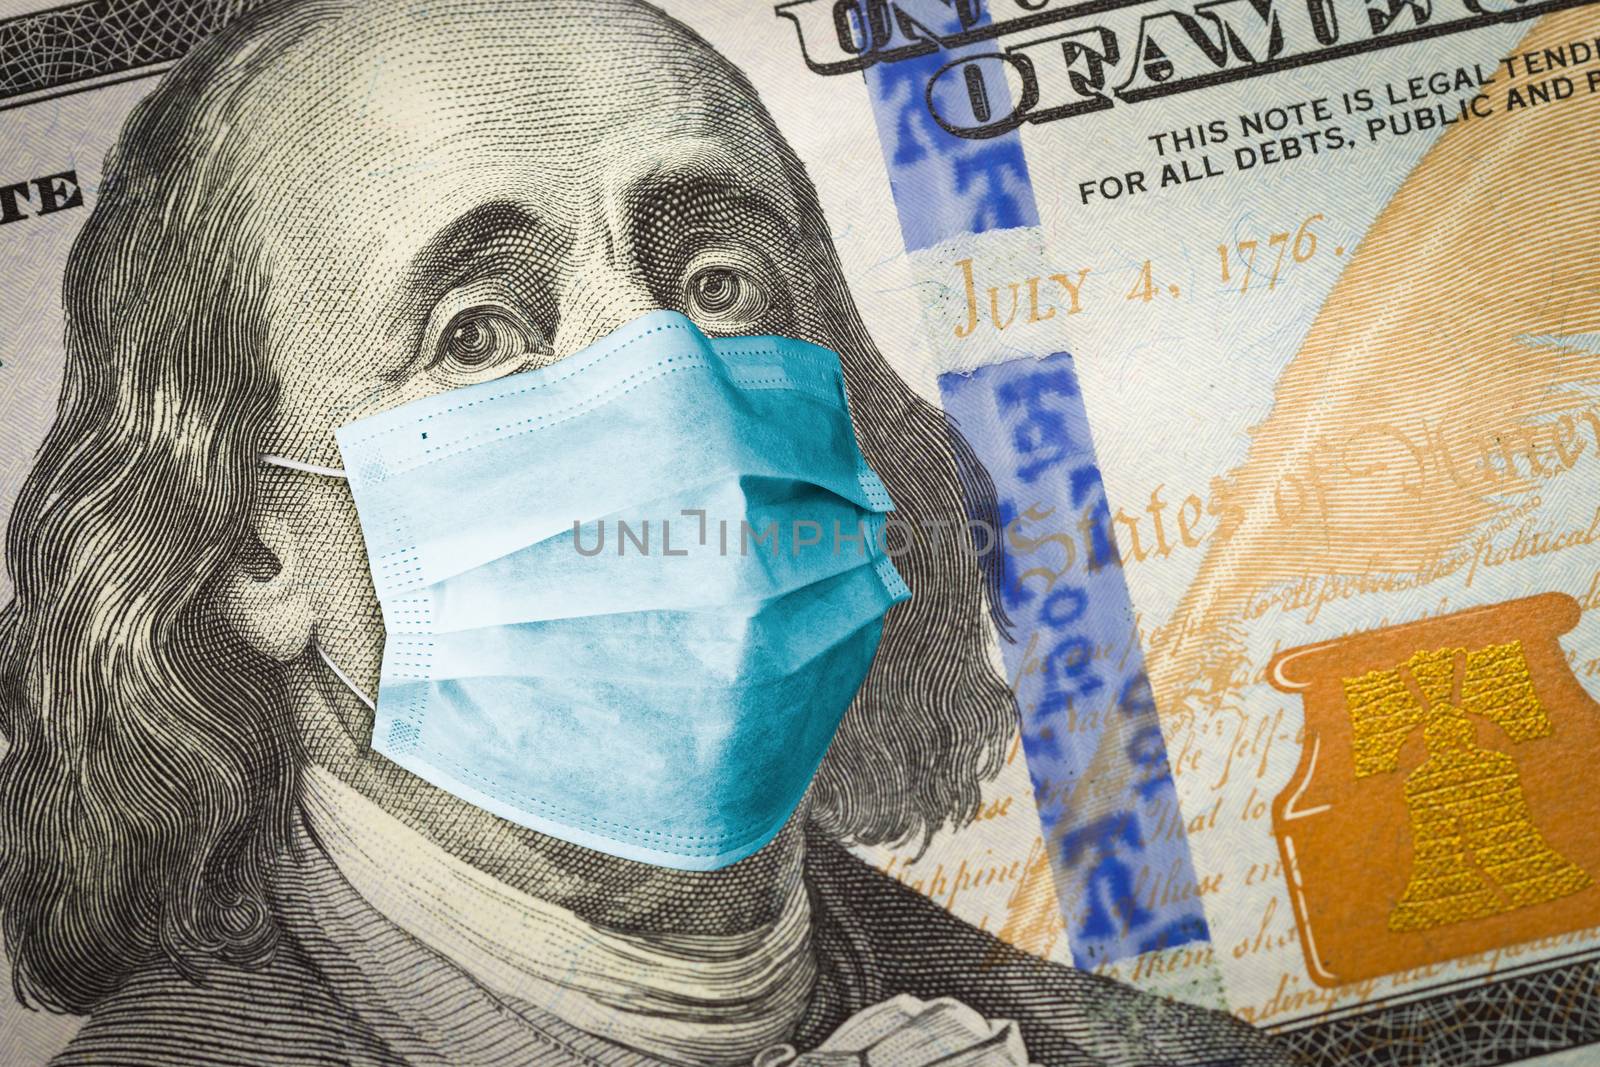 Benjamin Franklin With Worried and Concerned Expression Wearing Medical Face Mask On One Hundred Dollar Bill.